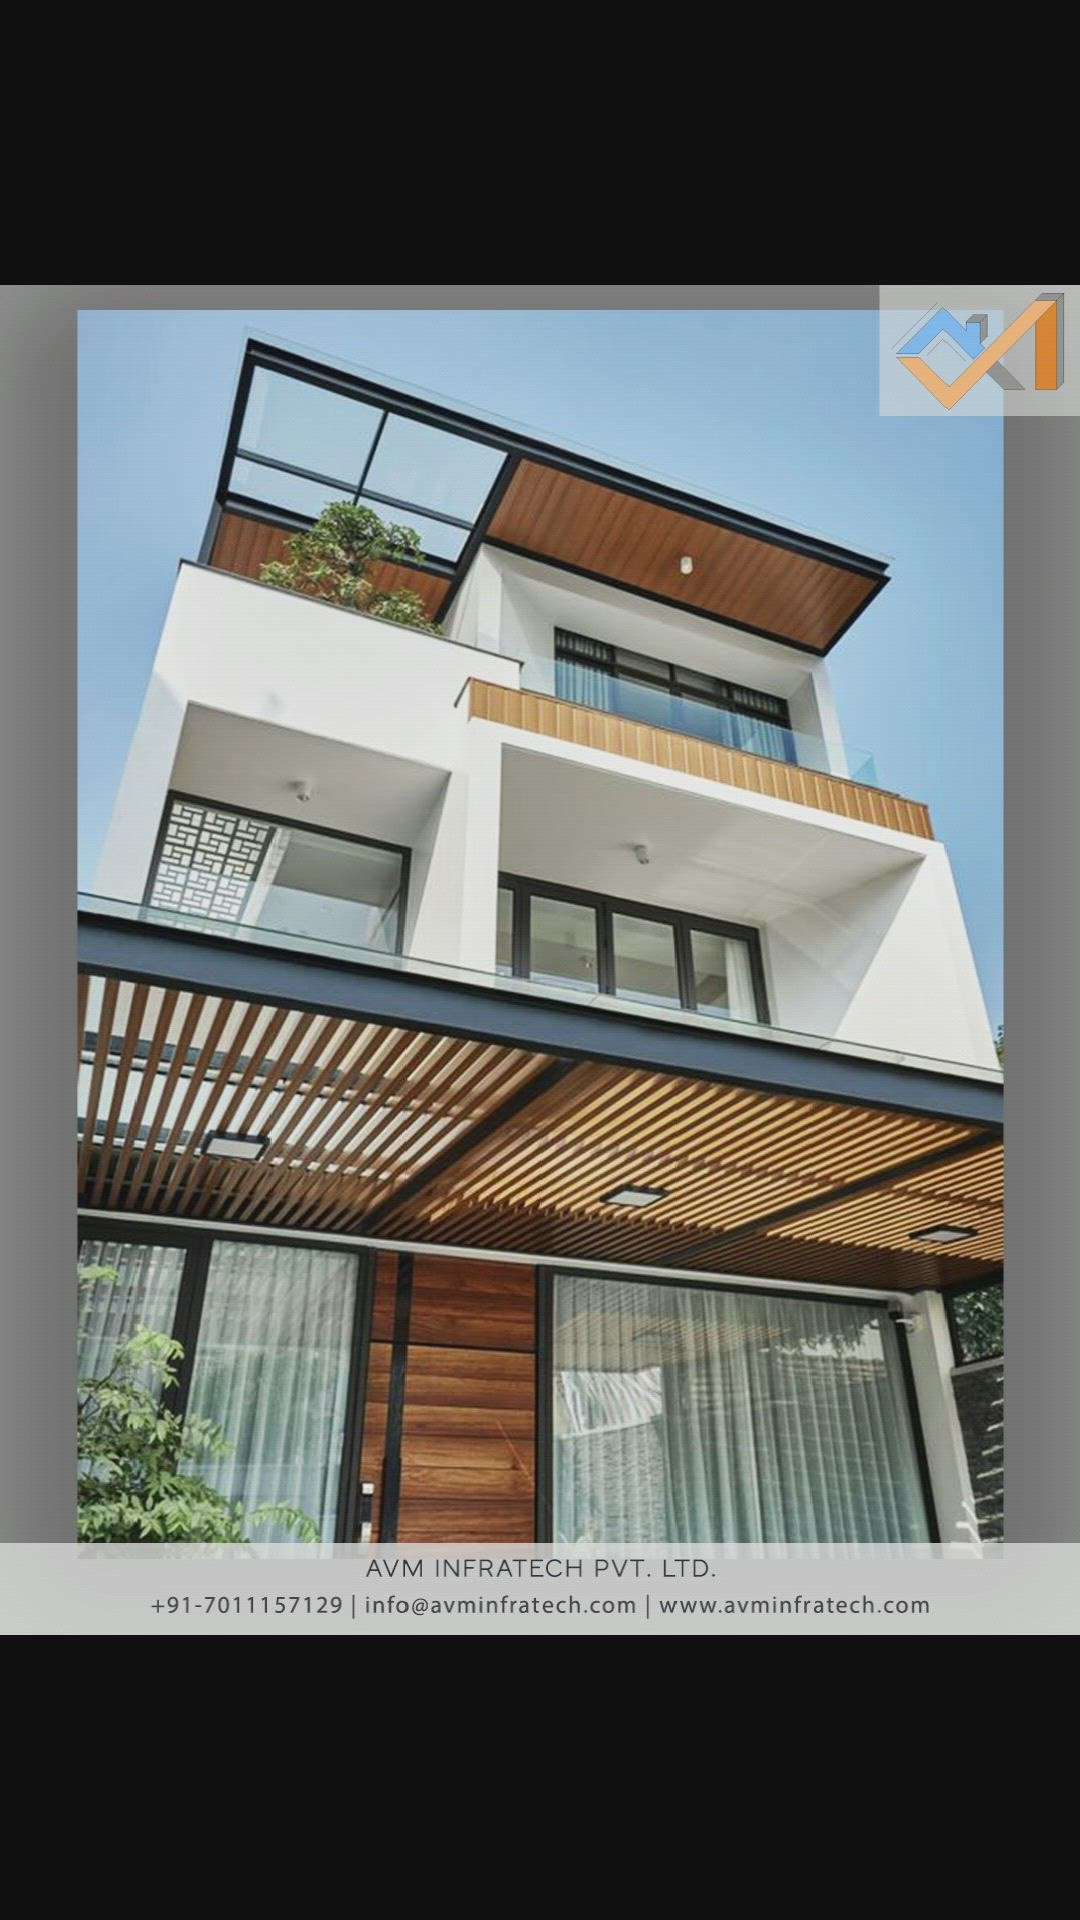 The front elevation designs hold great importance in the architecture of a building as it not only makes the building visually appealing but also adds to its environmental and commercial value. From the normal house front elevation designs to front home designing, housing elevation design, and building elevation design, all these processes involve careful and precise planning.


Follow us for more such amazing updates. 
.
.
#front #elevation #architect #architecture #interior #interiordesign #facade #elevationdesign #design #decor #practical #aesthetic #perspective #pattern #natural #stone